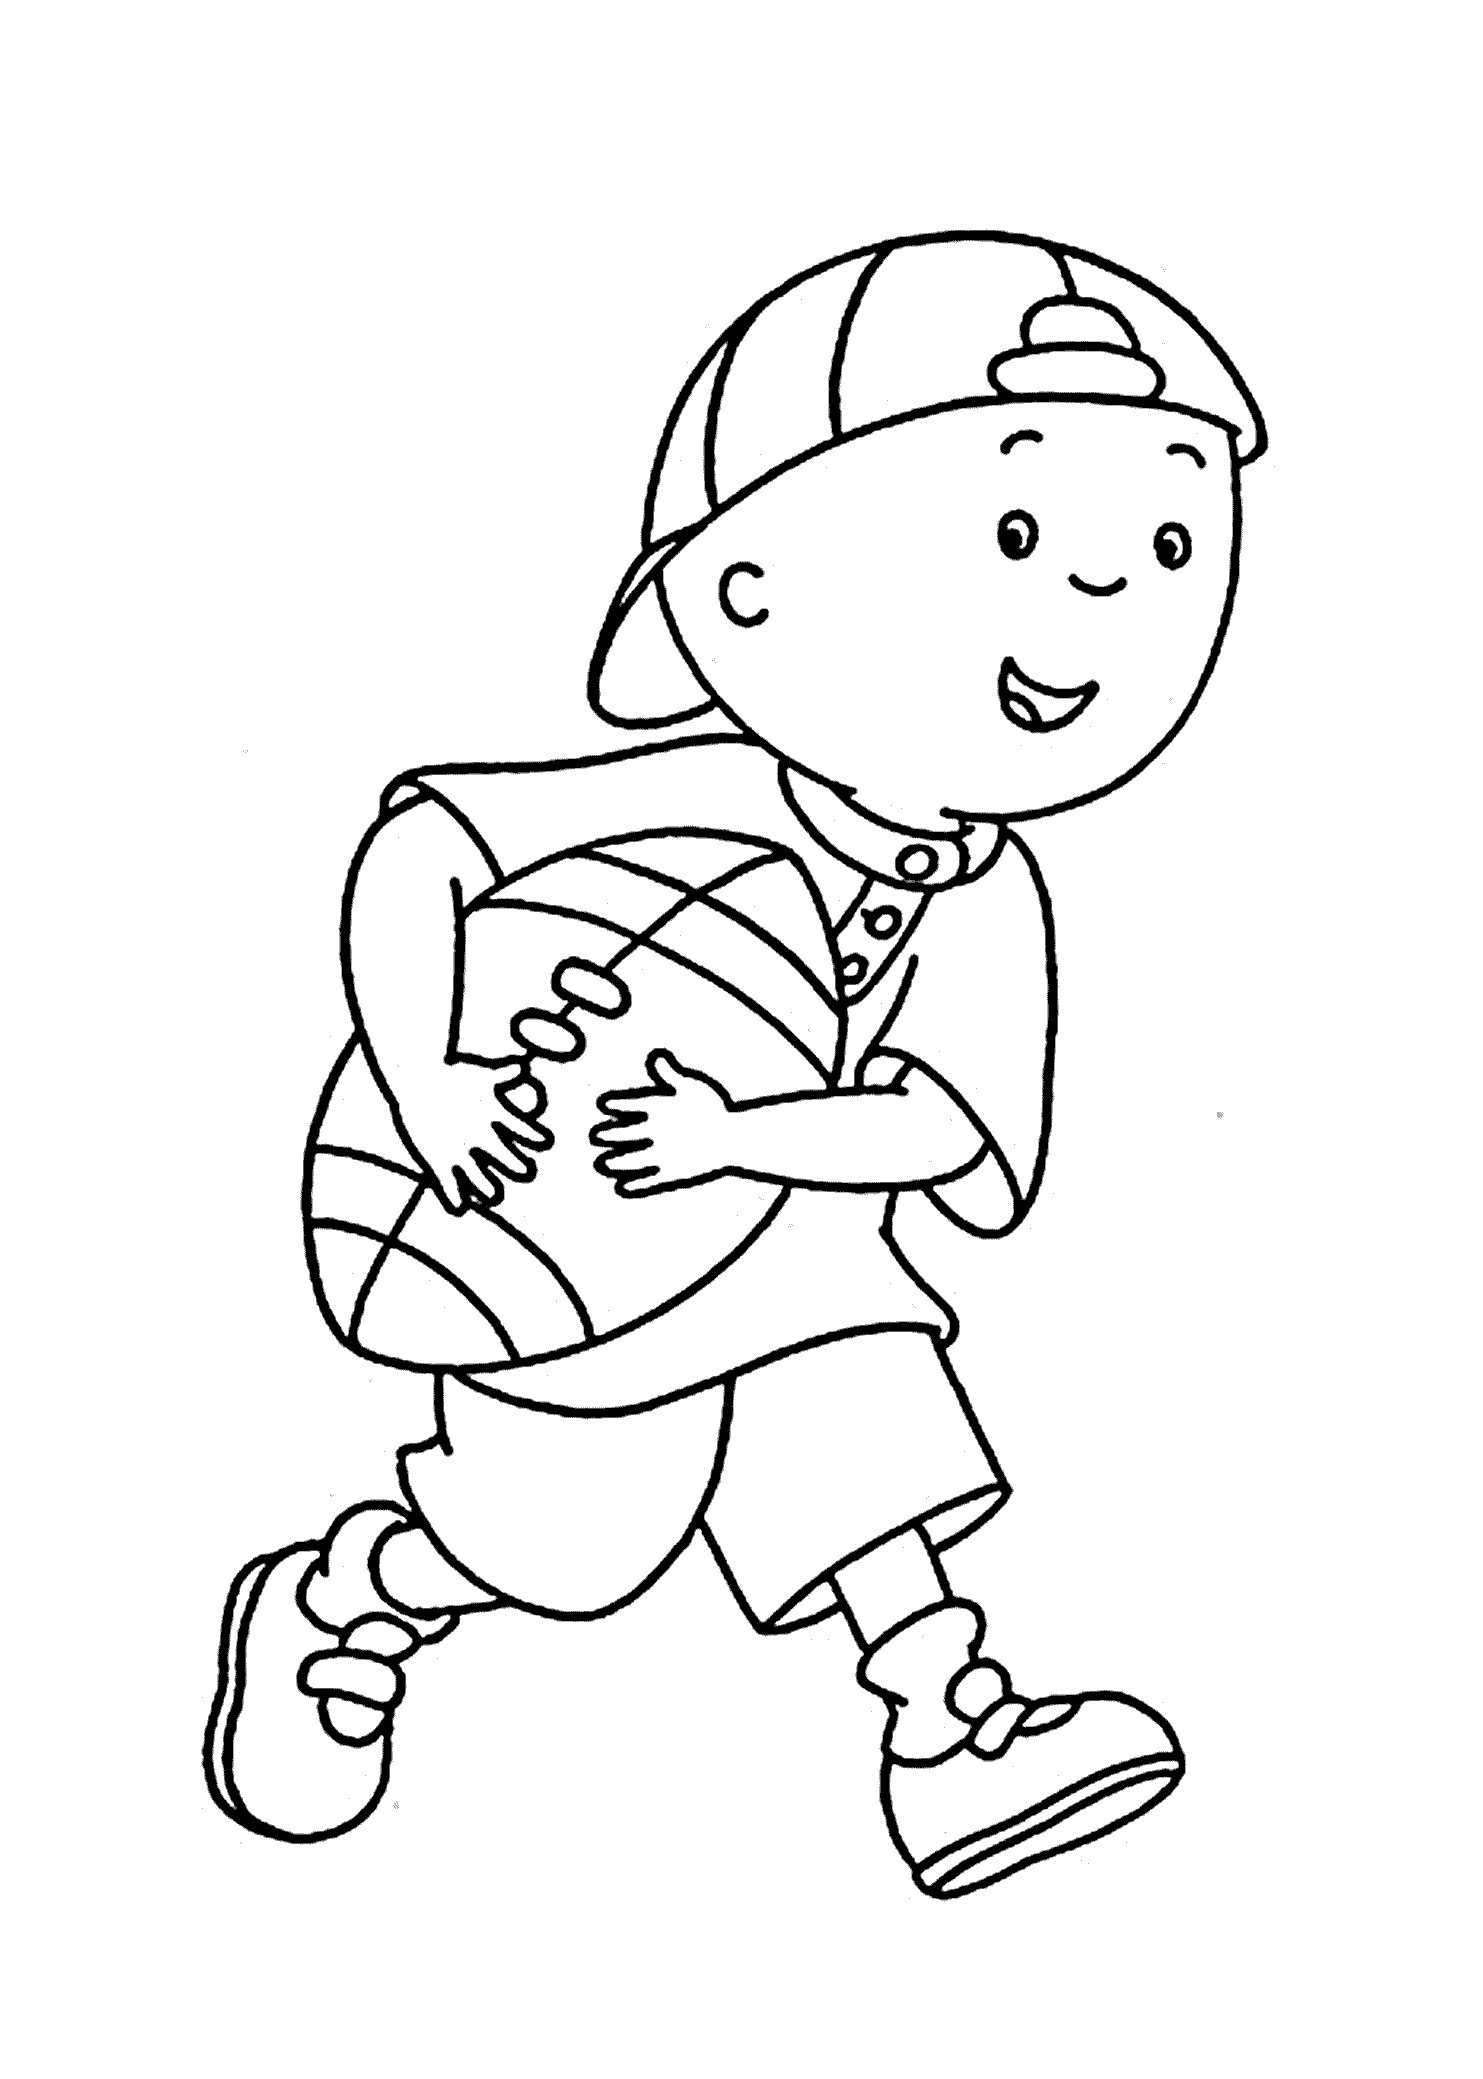 Caliou Coloring Sheets For Boys
 Rugby Caillou Coloring Pages coloringsuite